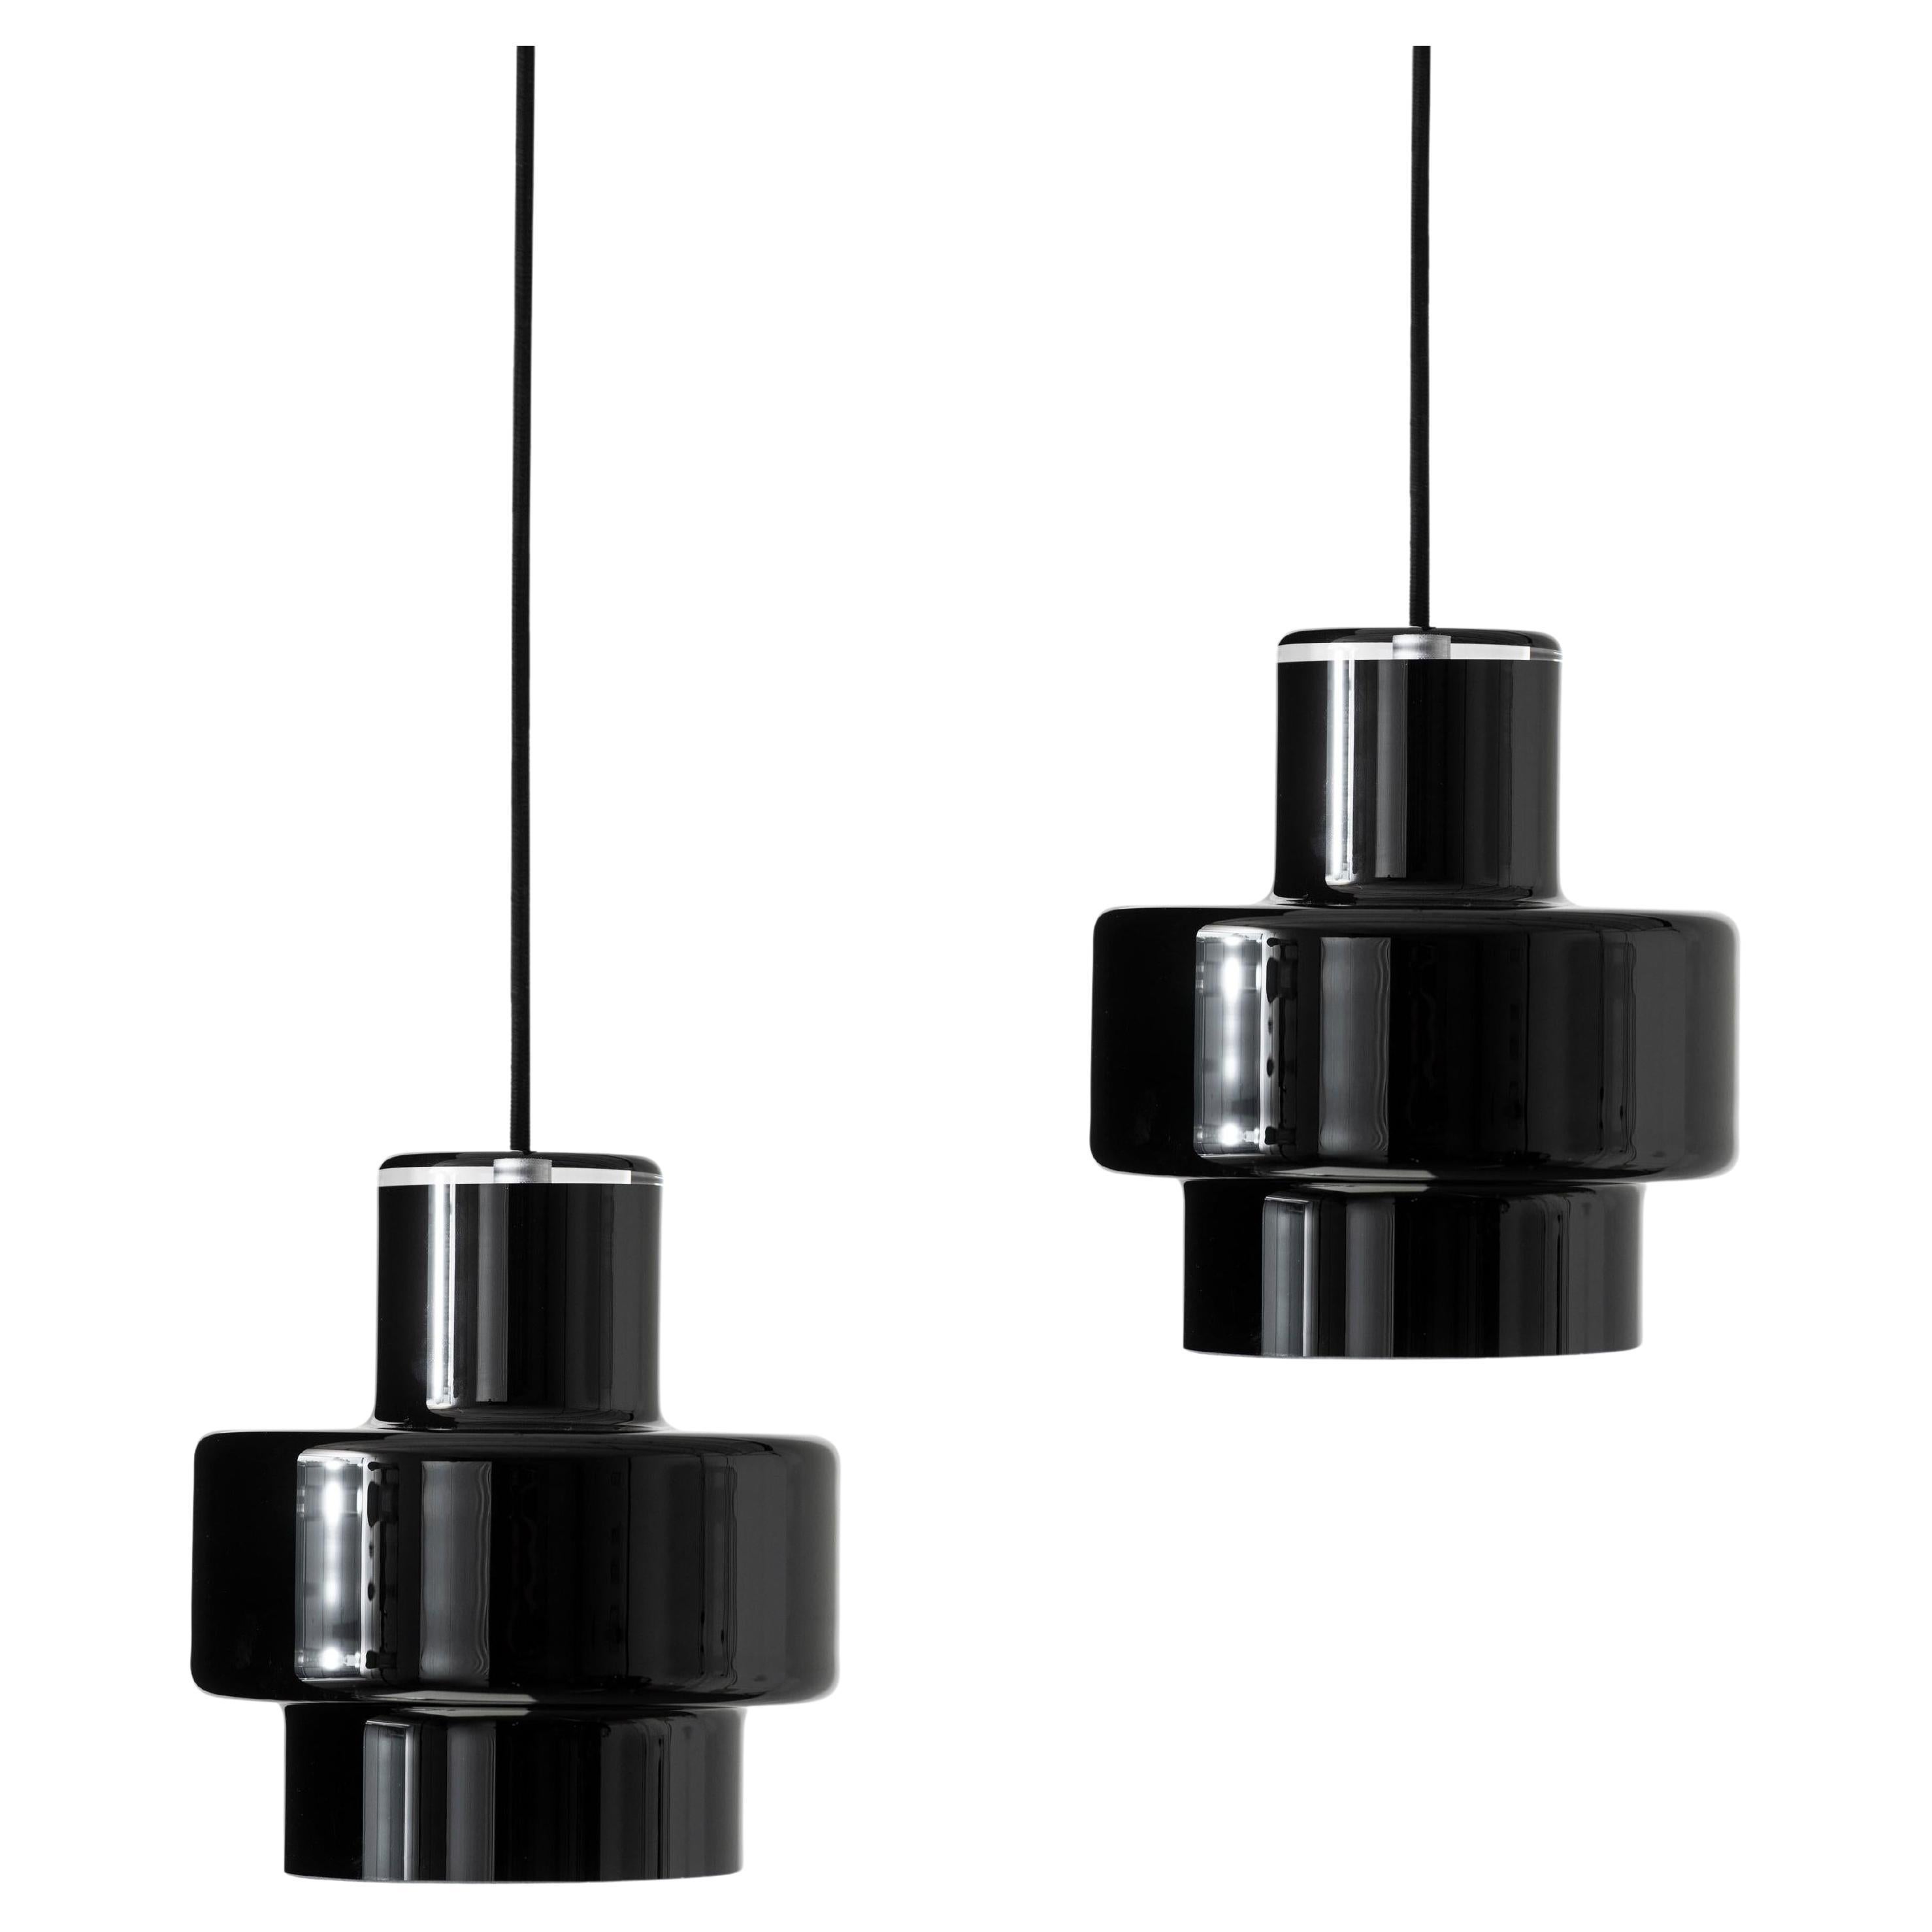 Pair of 'Multi M' Glass Pendants in Black by Jokinen and Konu for Innolux